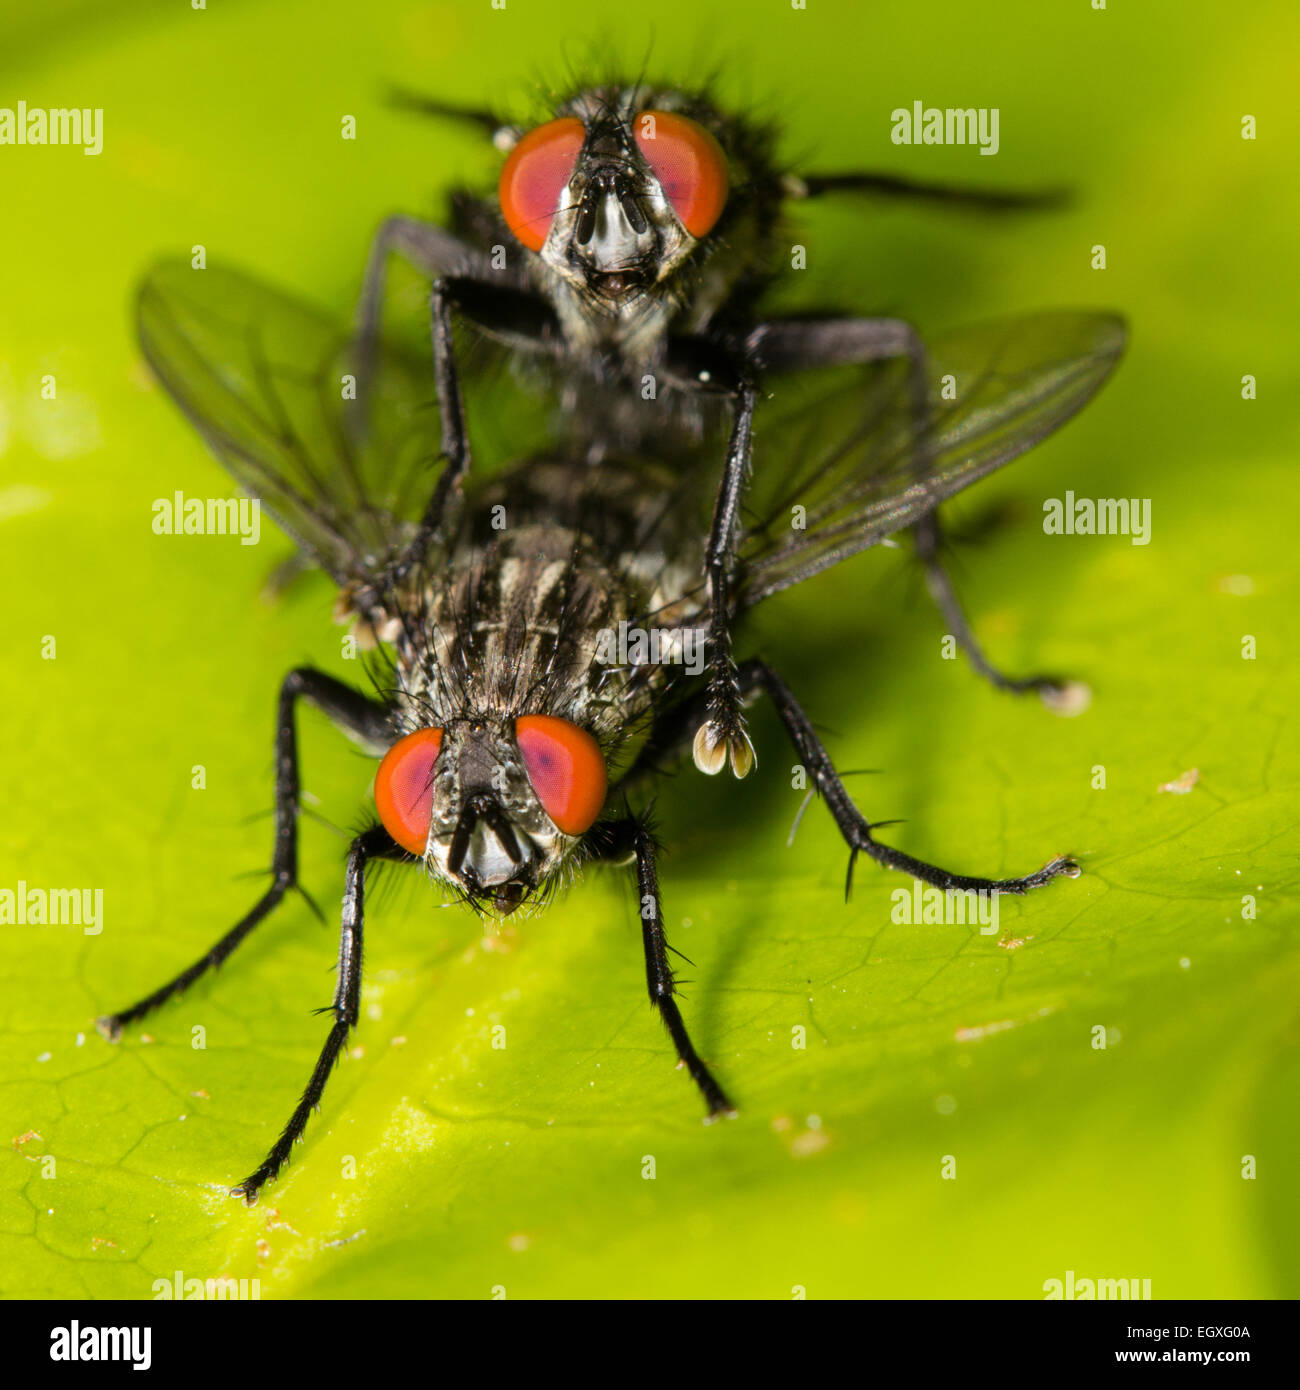 Head on view of mating pair of flesh flies, Sarcophaga sp.  Species ID not confirmable Stock Photo